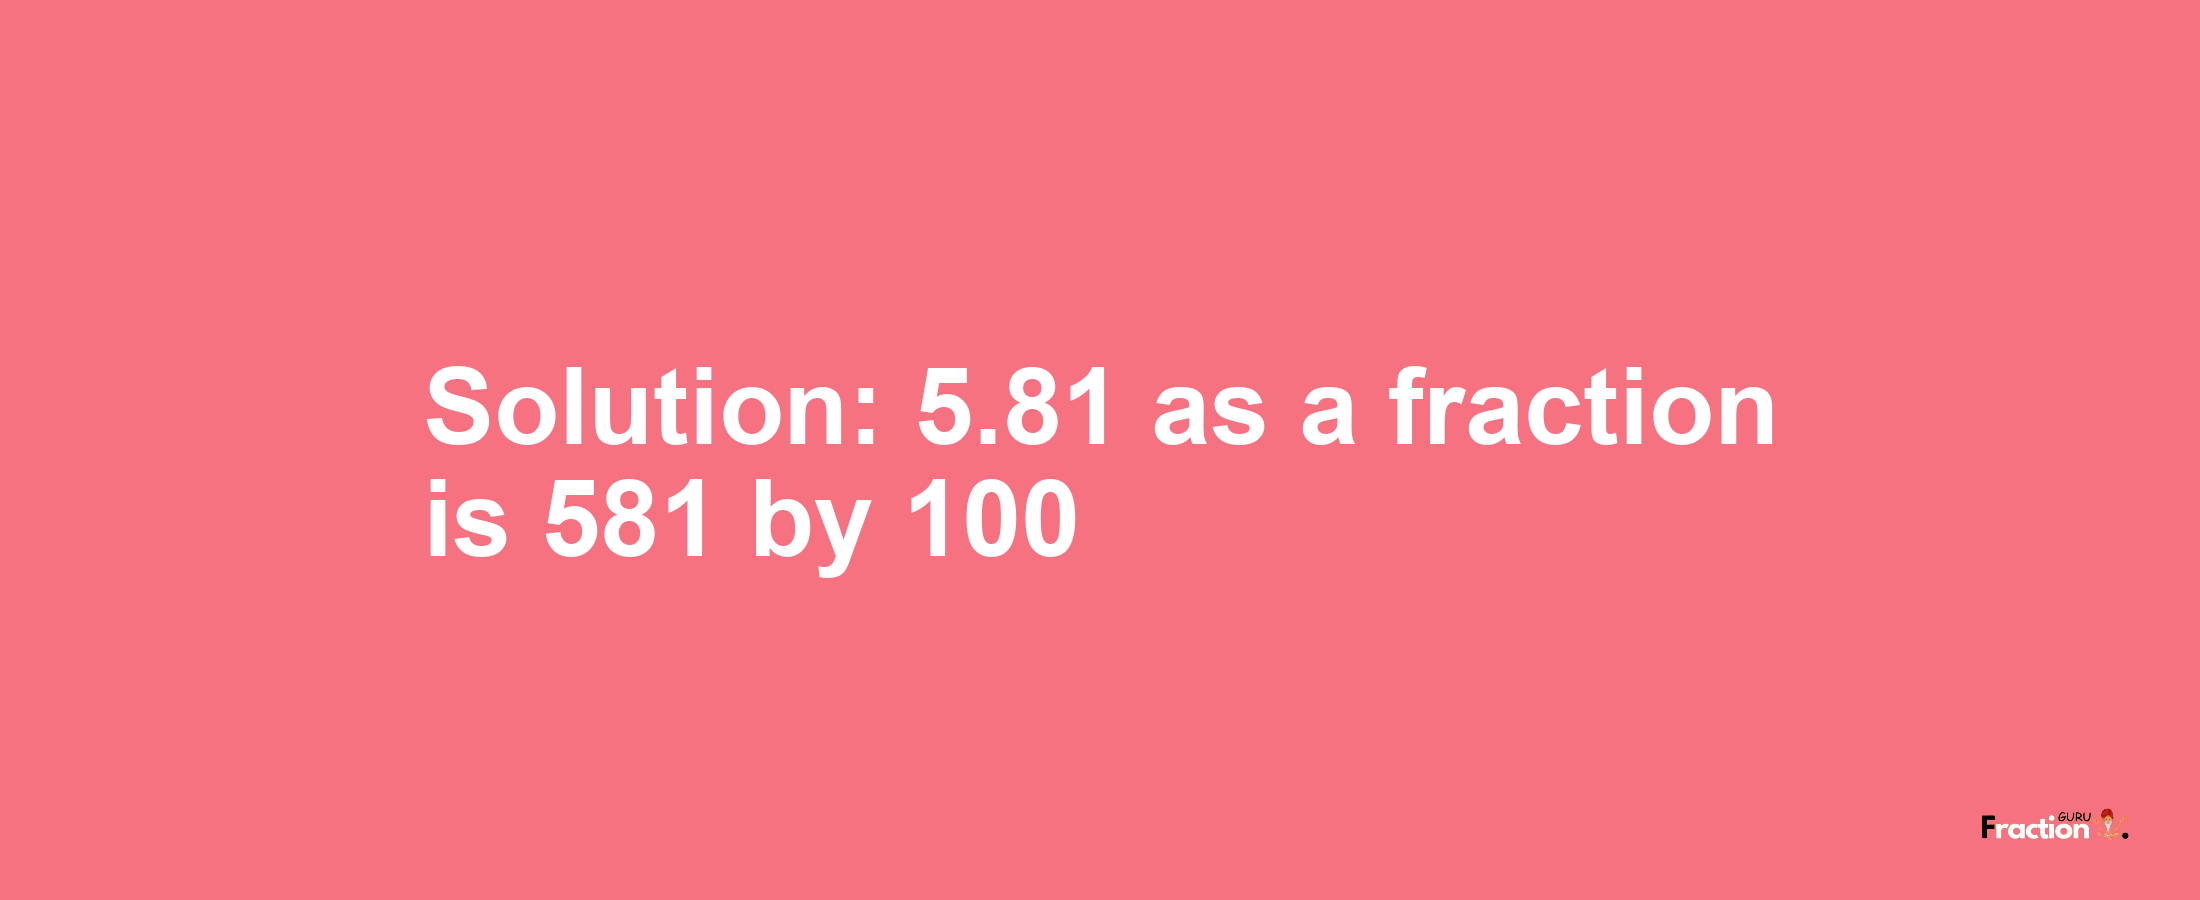 Solution:5.81 as a fraction is 581/100